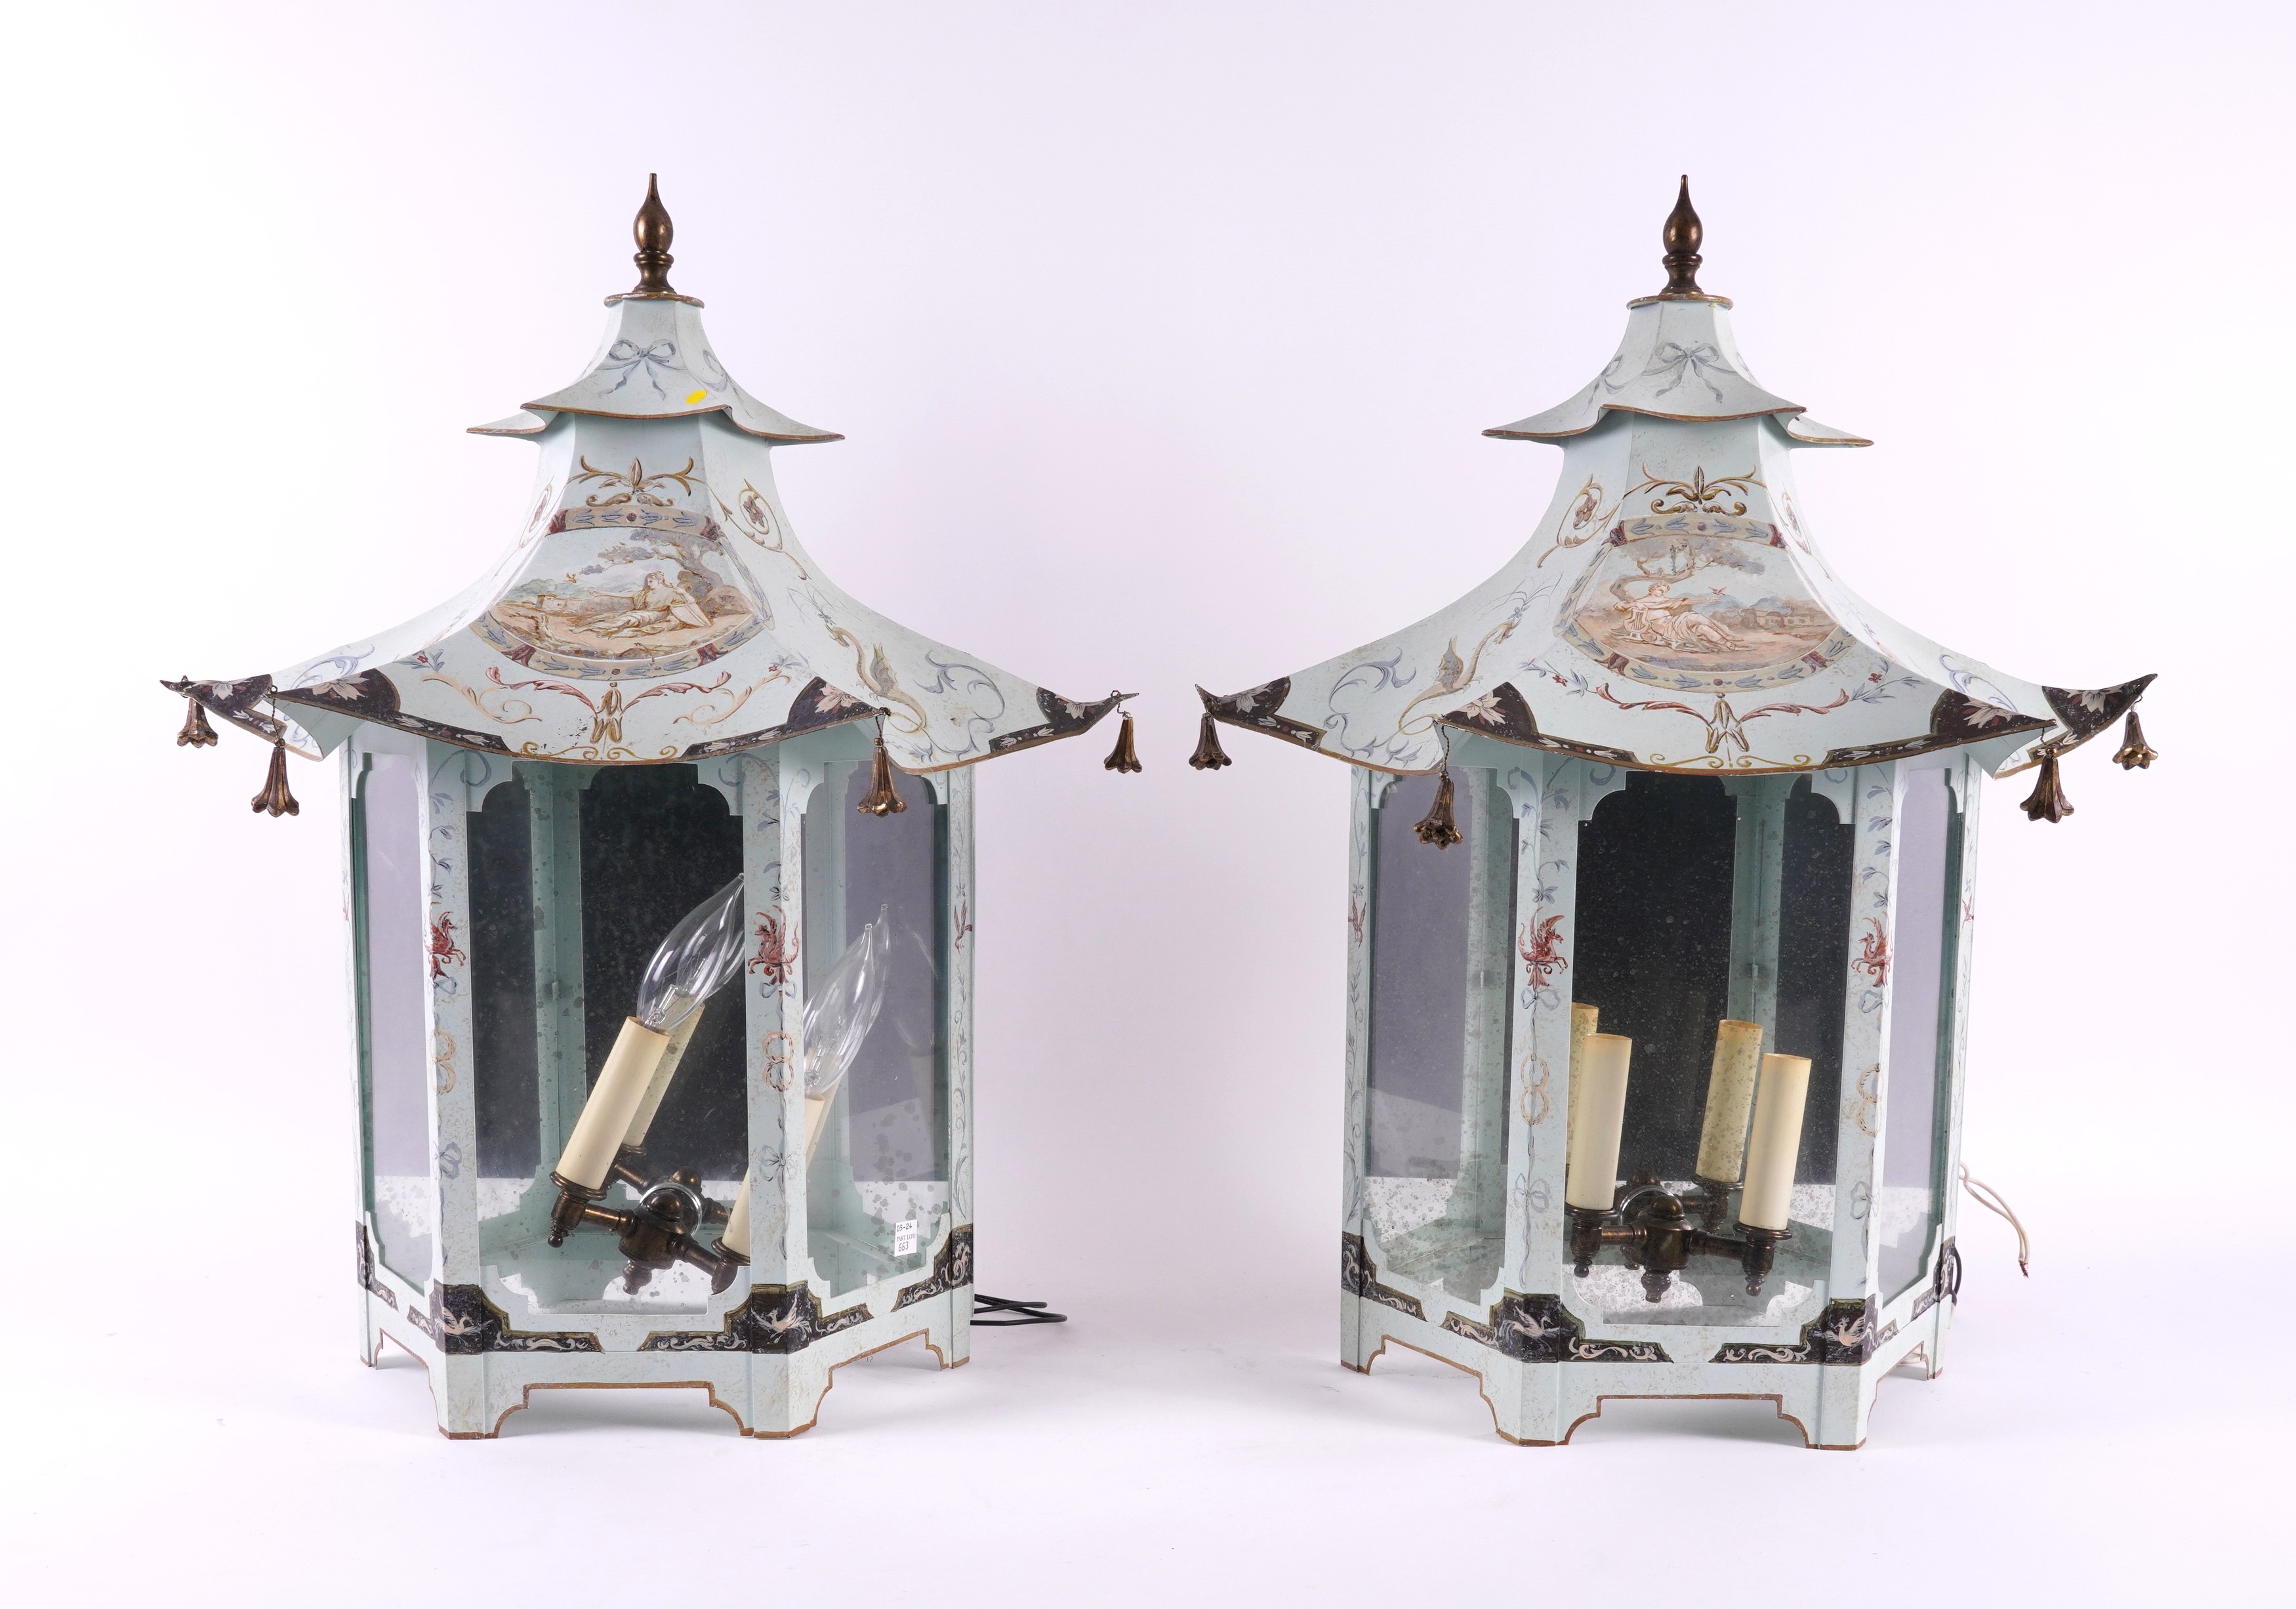 A PAIR OF LIGHT BLUE DECORATED TOLEWARE ‘PAGODA’ SHAPED WALL LIGHTS (2)